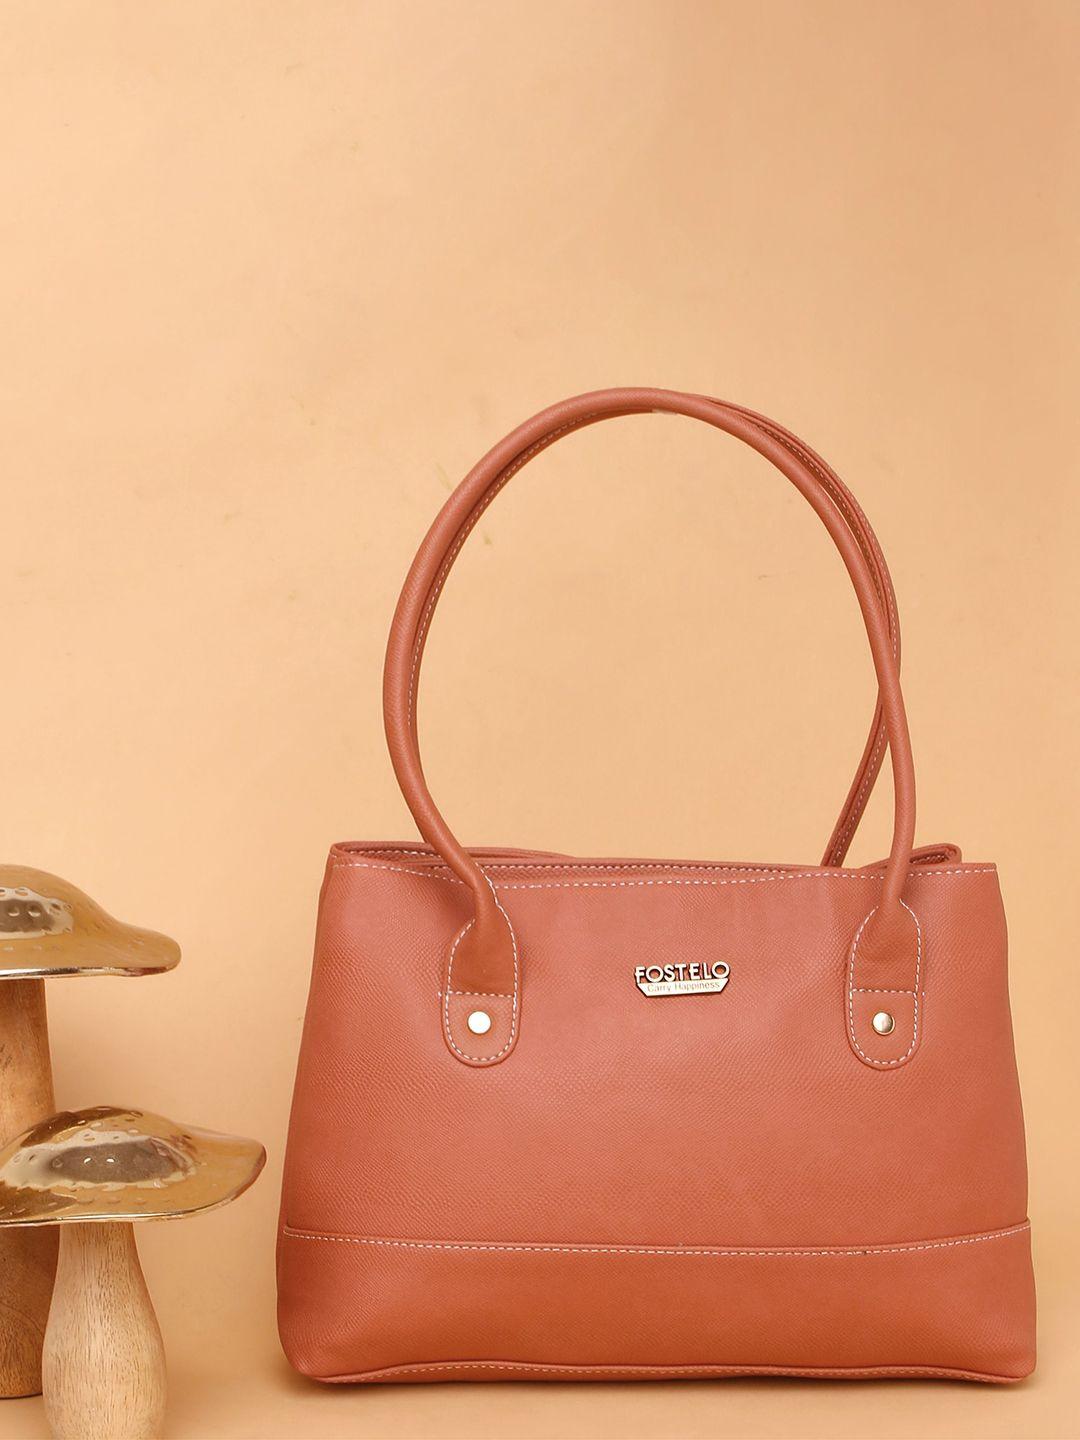 fostelo rose gold pu structured handheld bag with bow detail